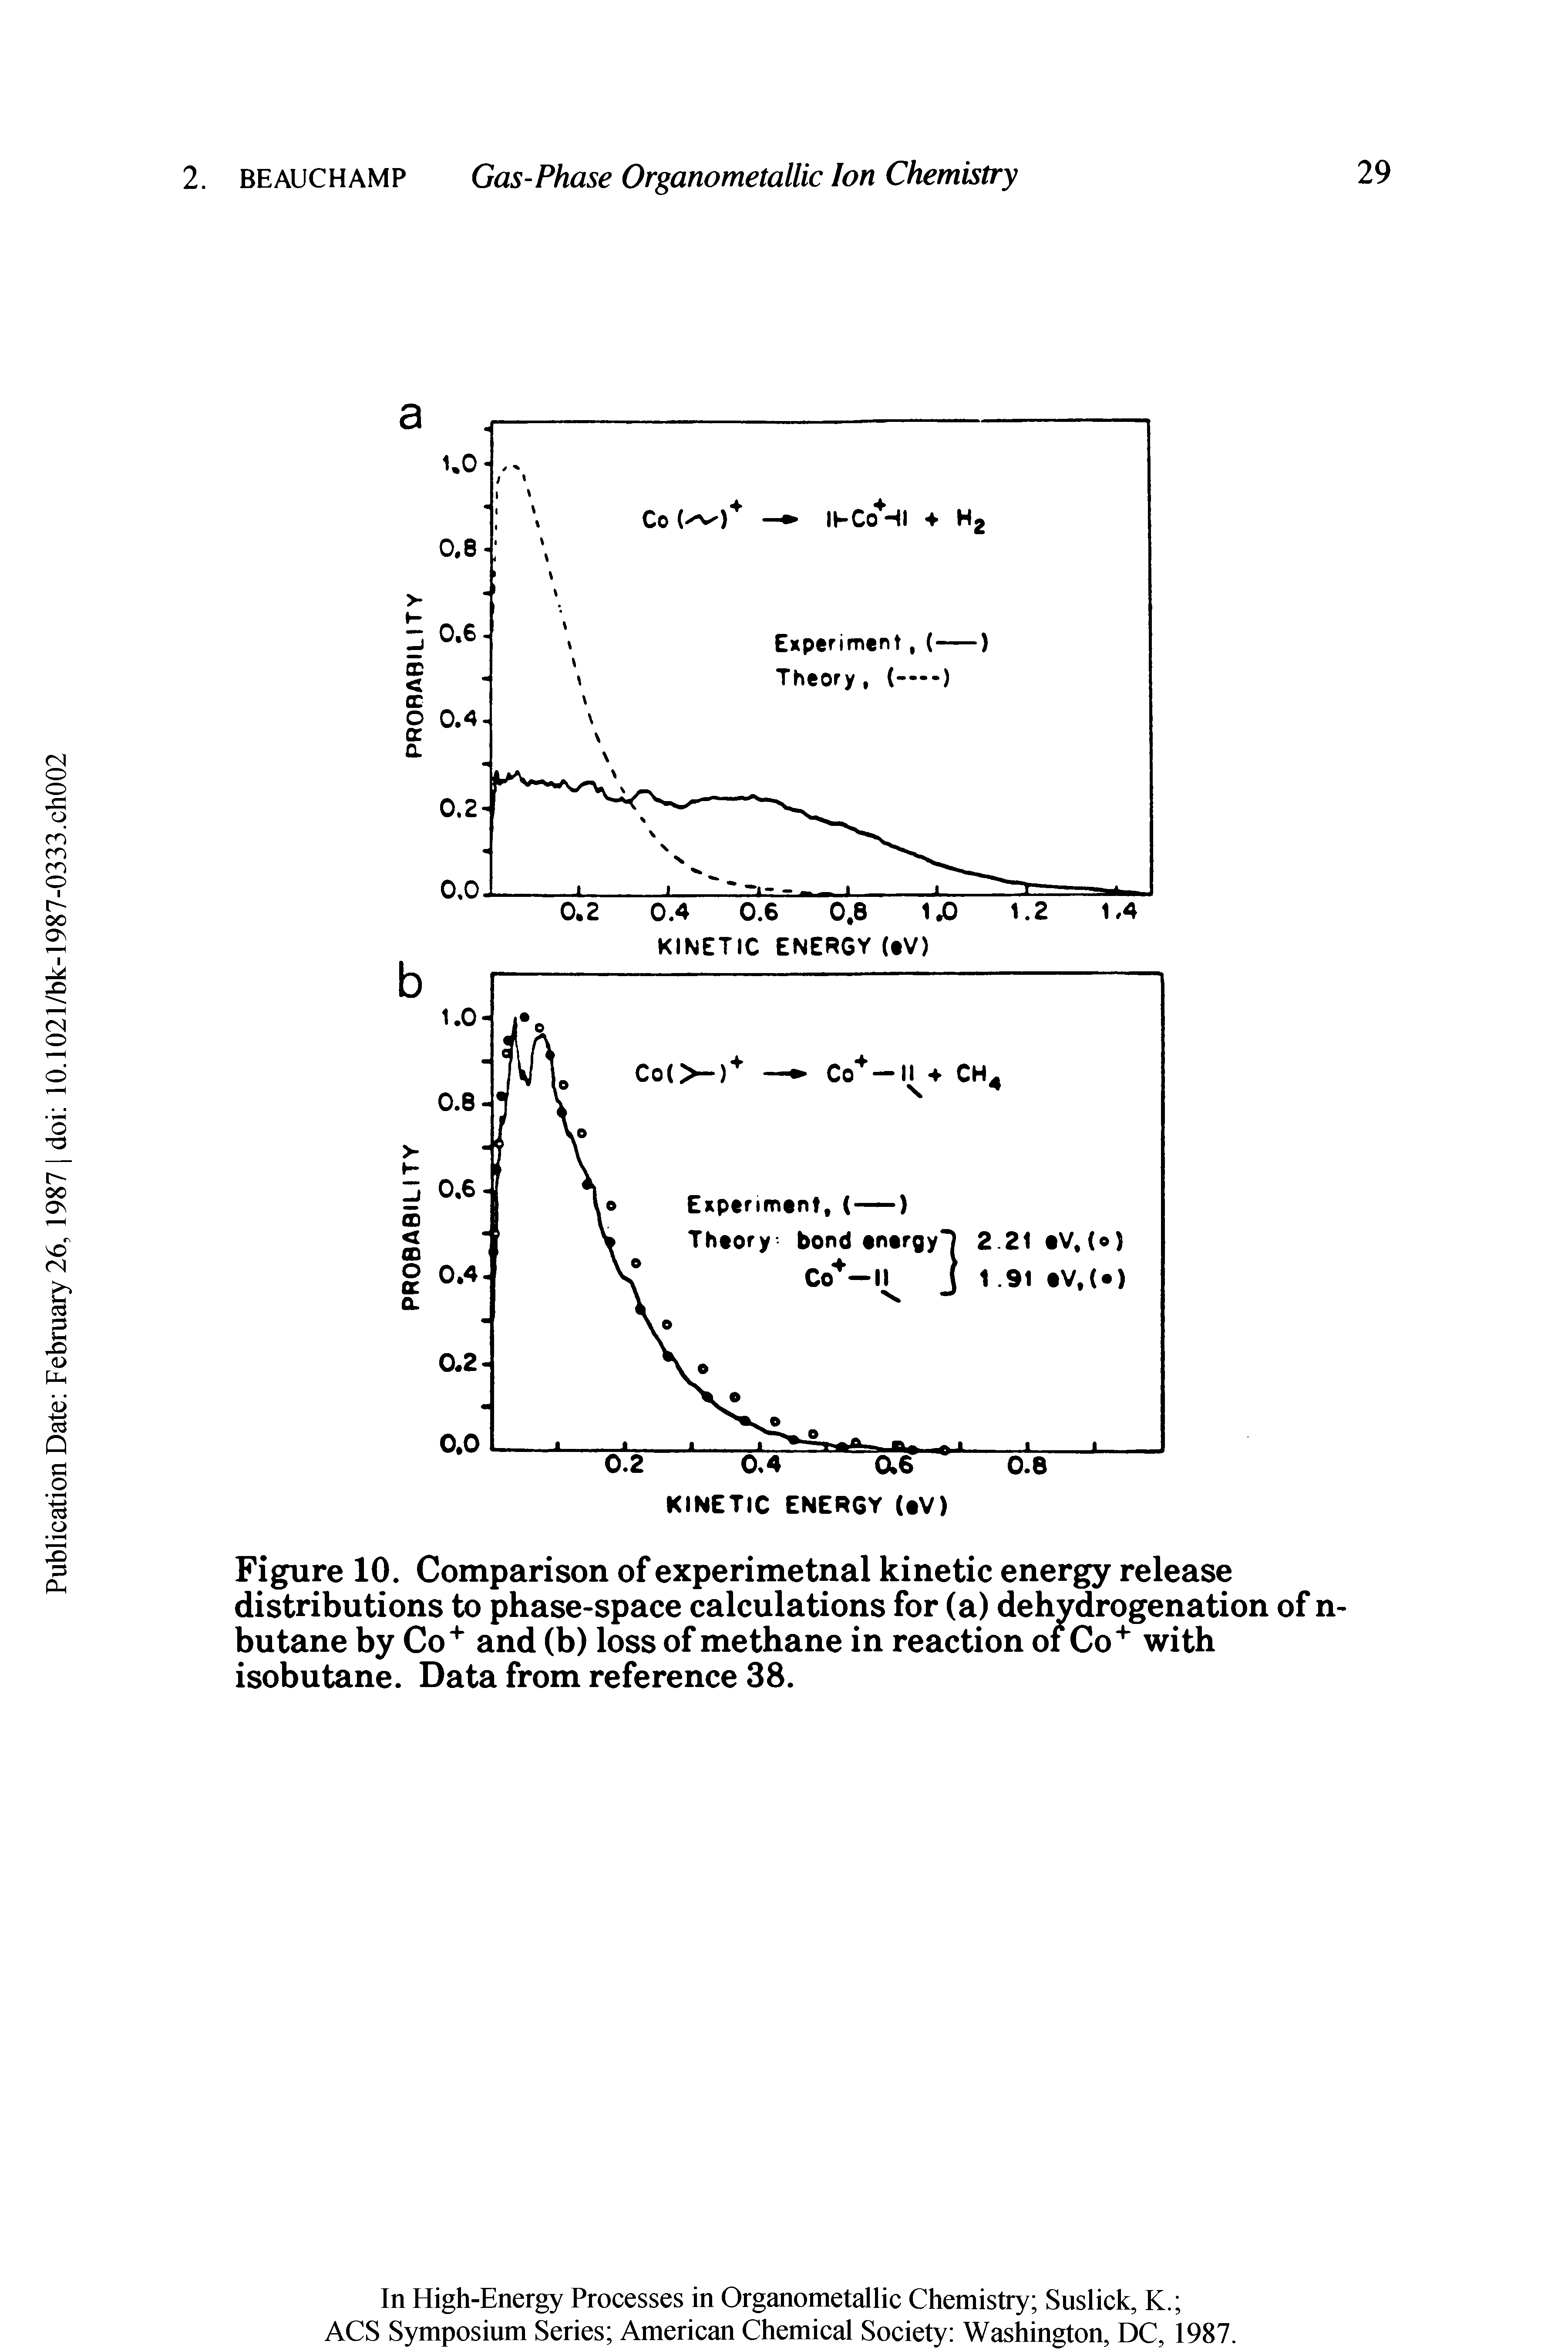 Figure 10. Comparison of experimetnal kinetic energy release distributions to phase-space calculations for (a) dehydrogenation of n-butane by Co+ and (b) loss of methane in reaction of Co+ with isobutane. Data from reference 38.